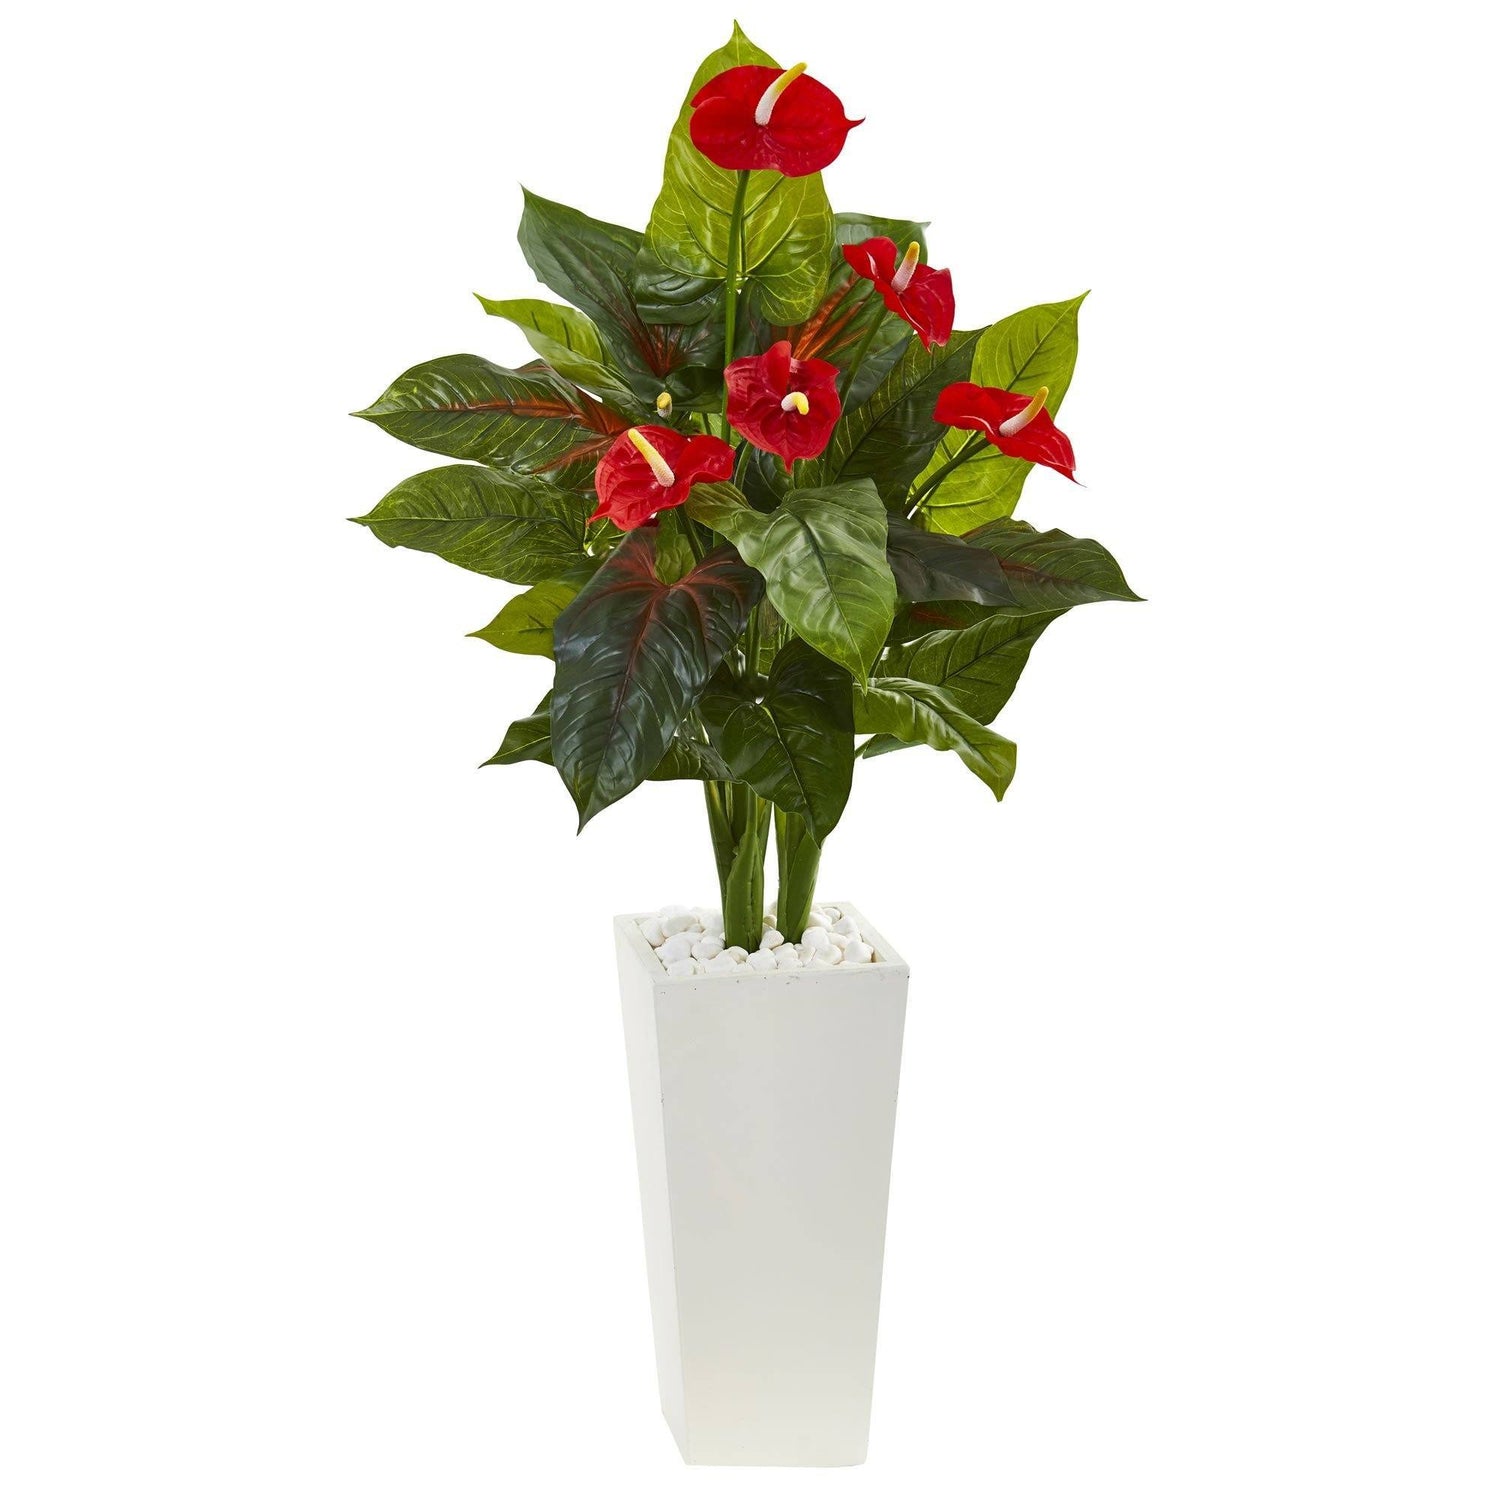 4.5’ Anthurium Artificial Plant in White Tower Planter